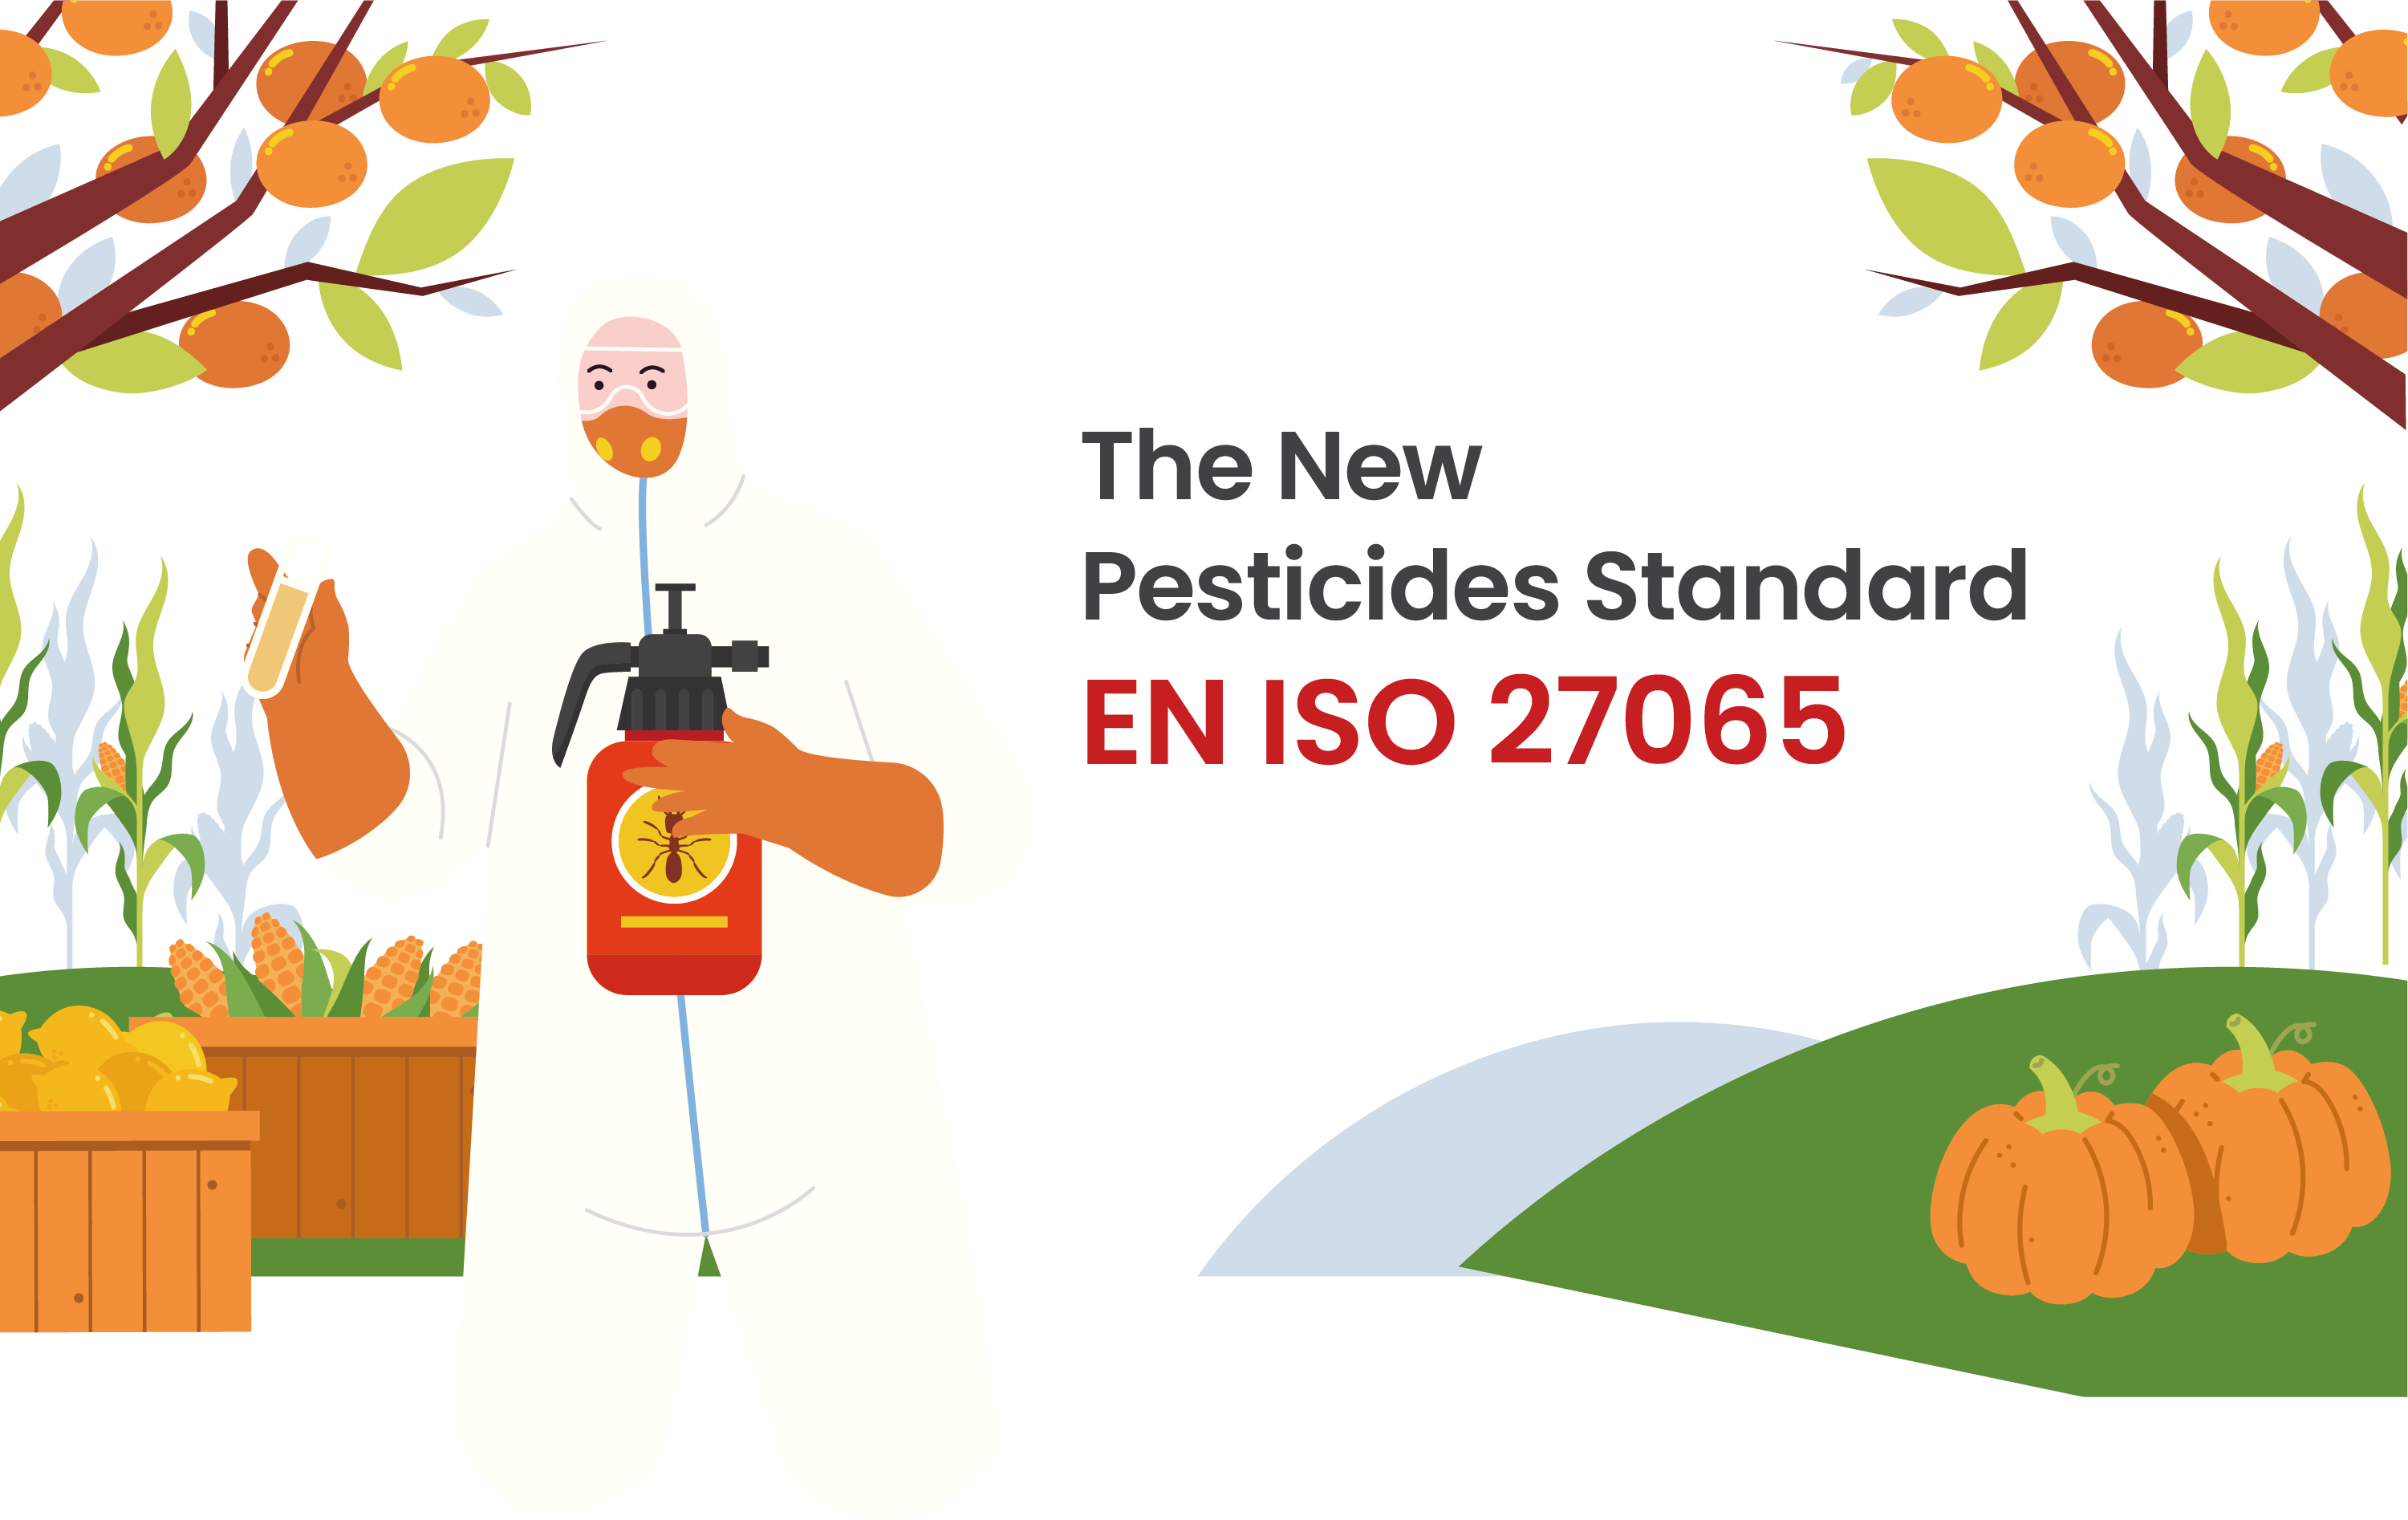 The New Pesticides Standard EN ISO 27065